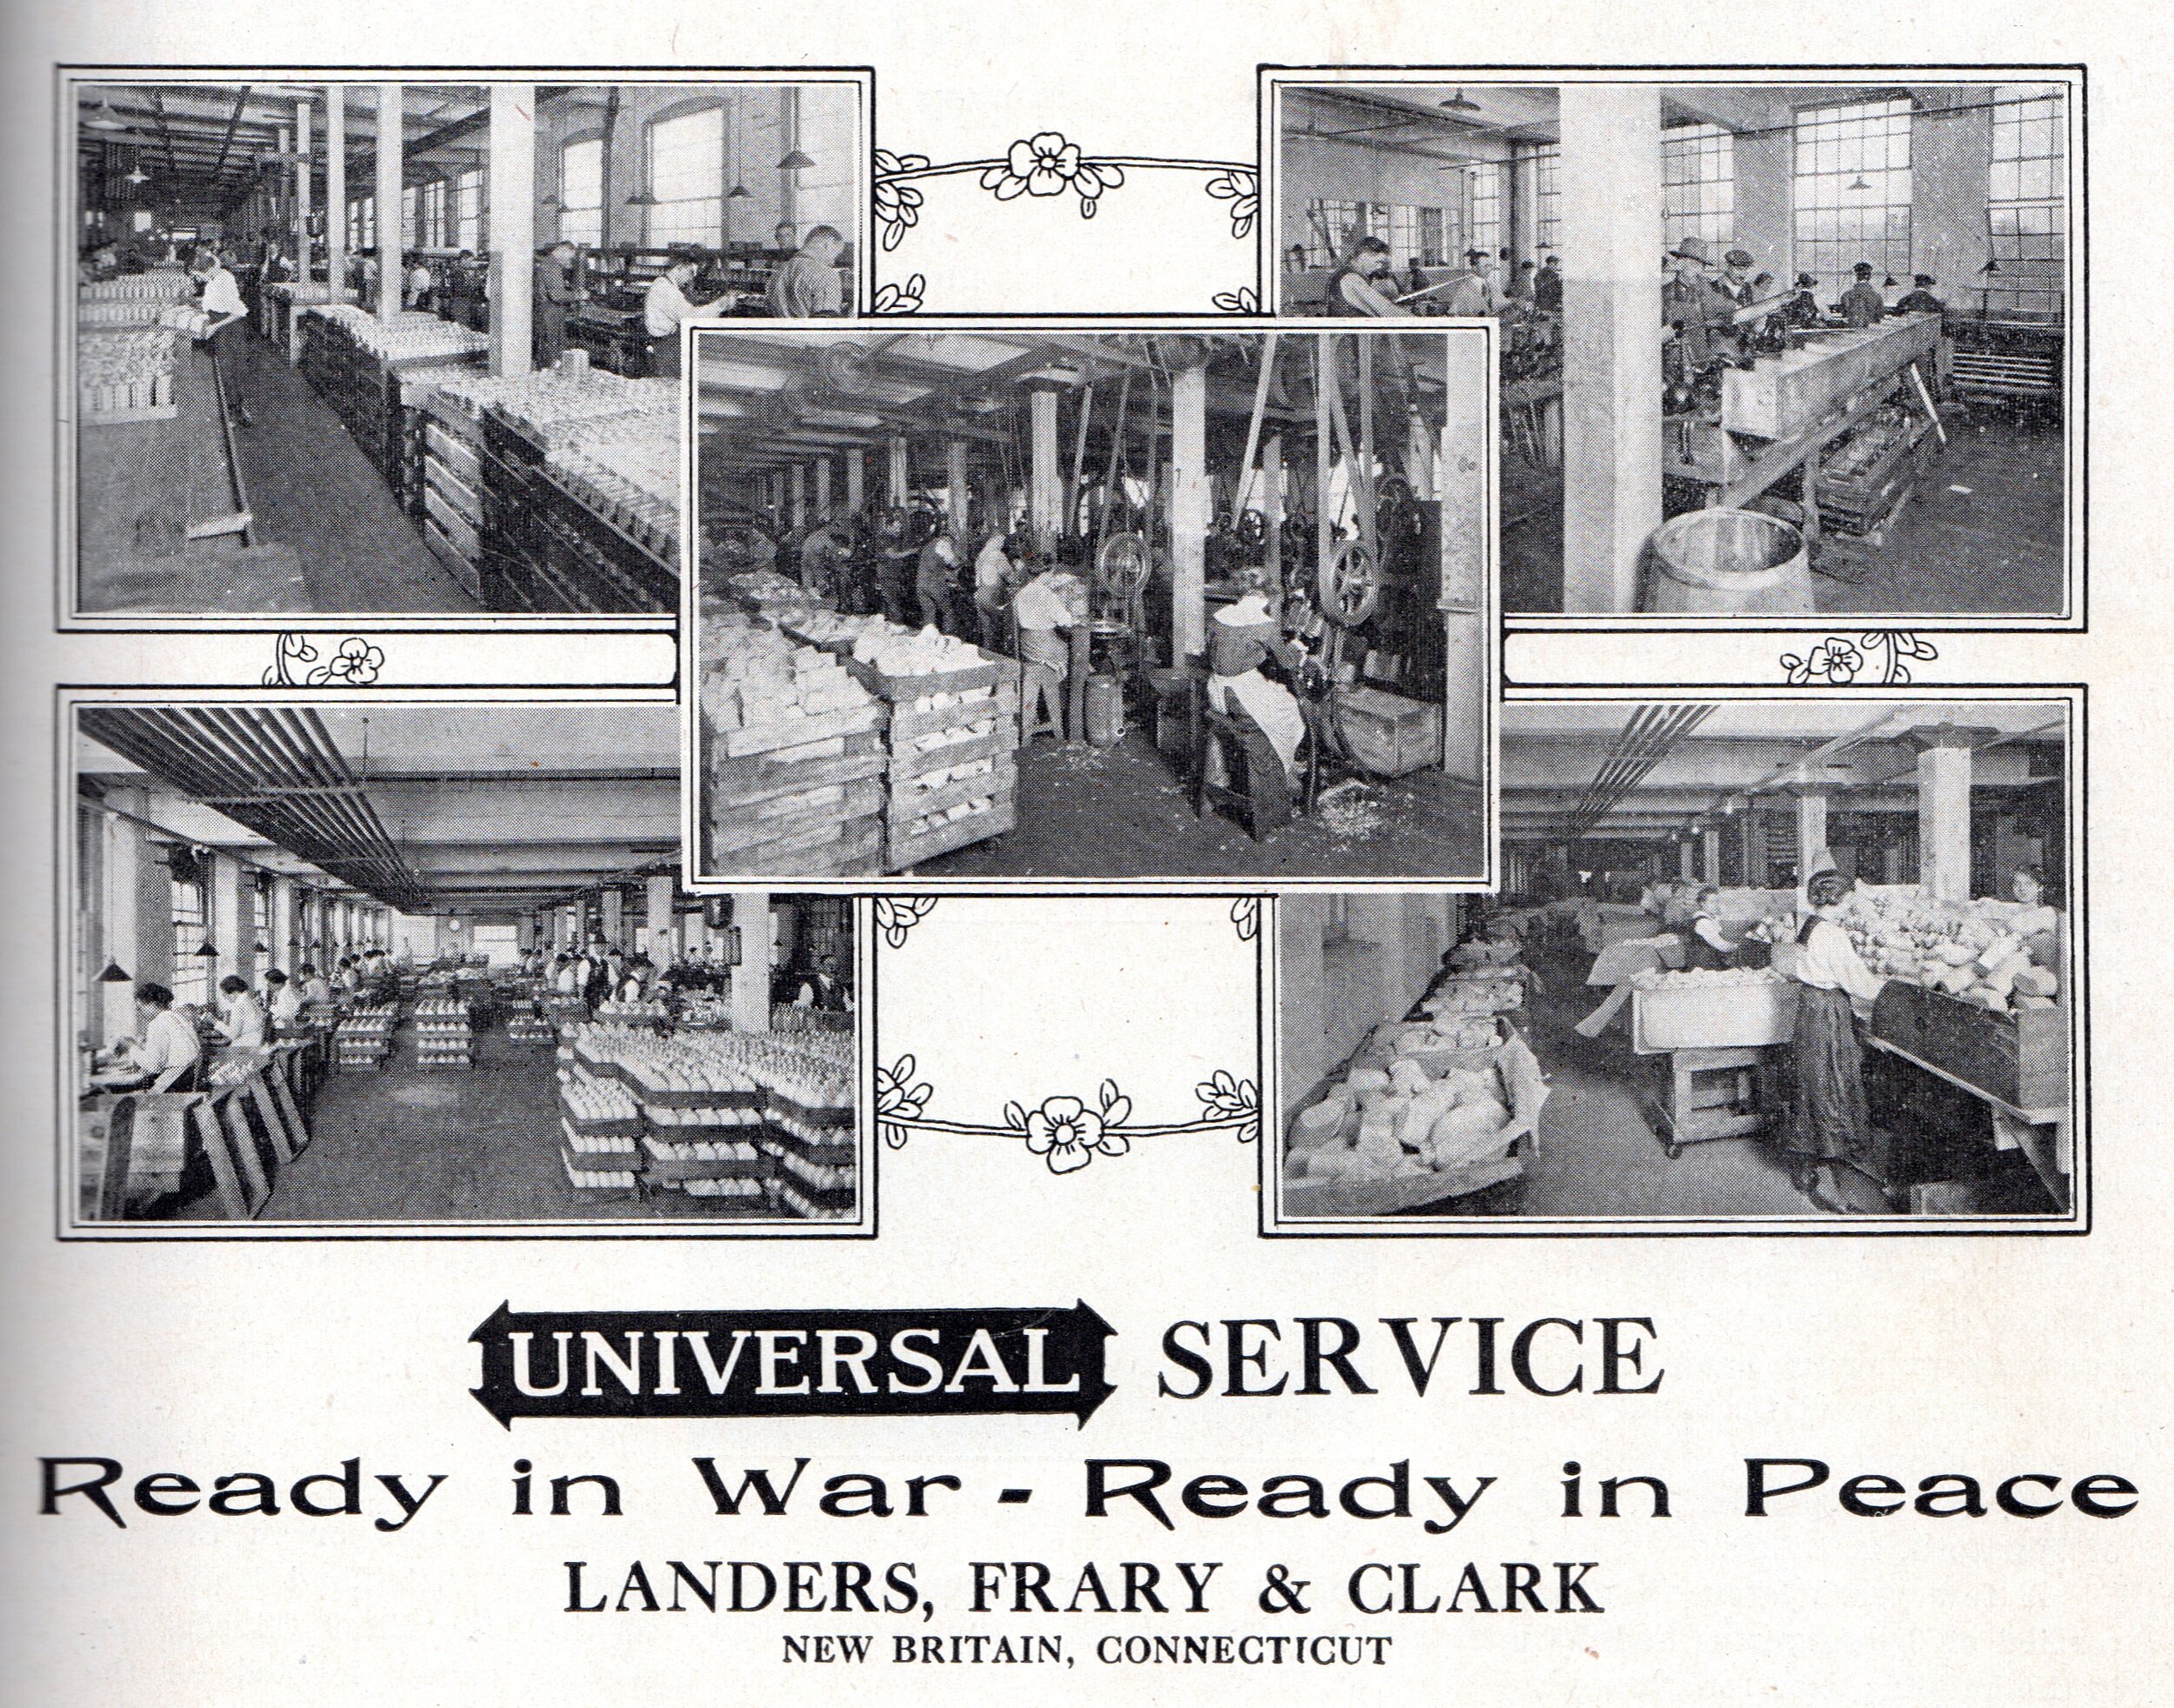 1919_09_15_Landers_page_workers_cropped_frm_Welcome_Home_program.jpg